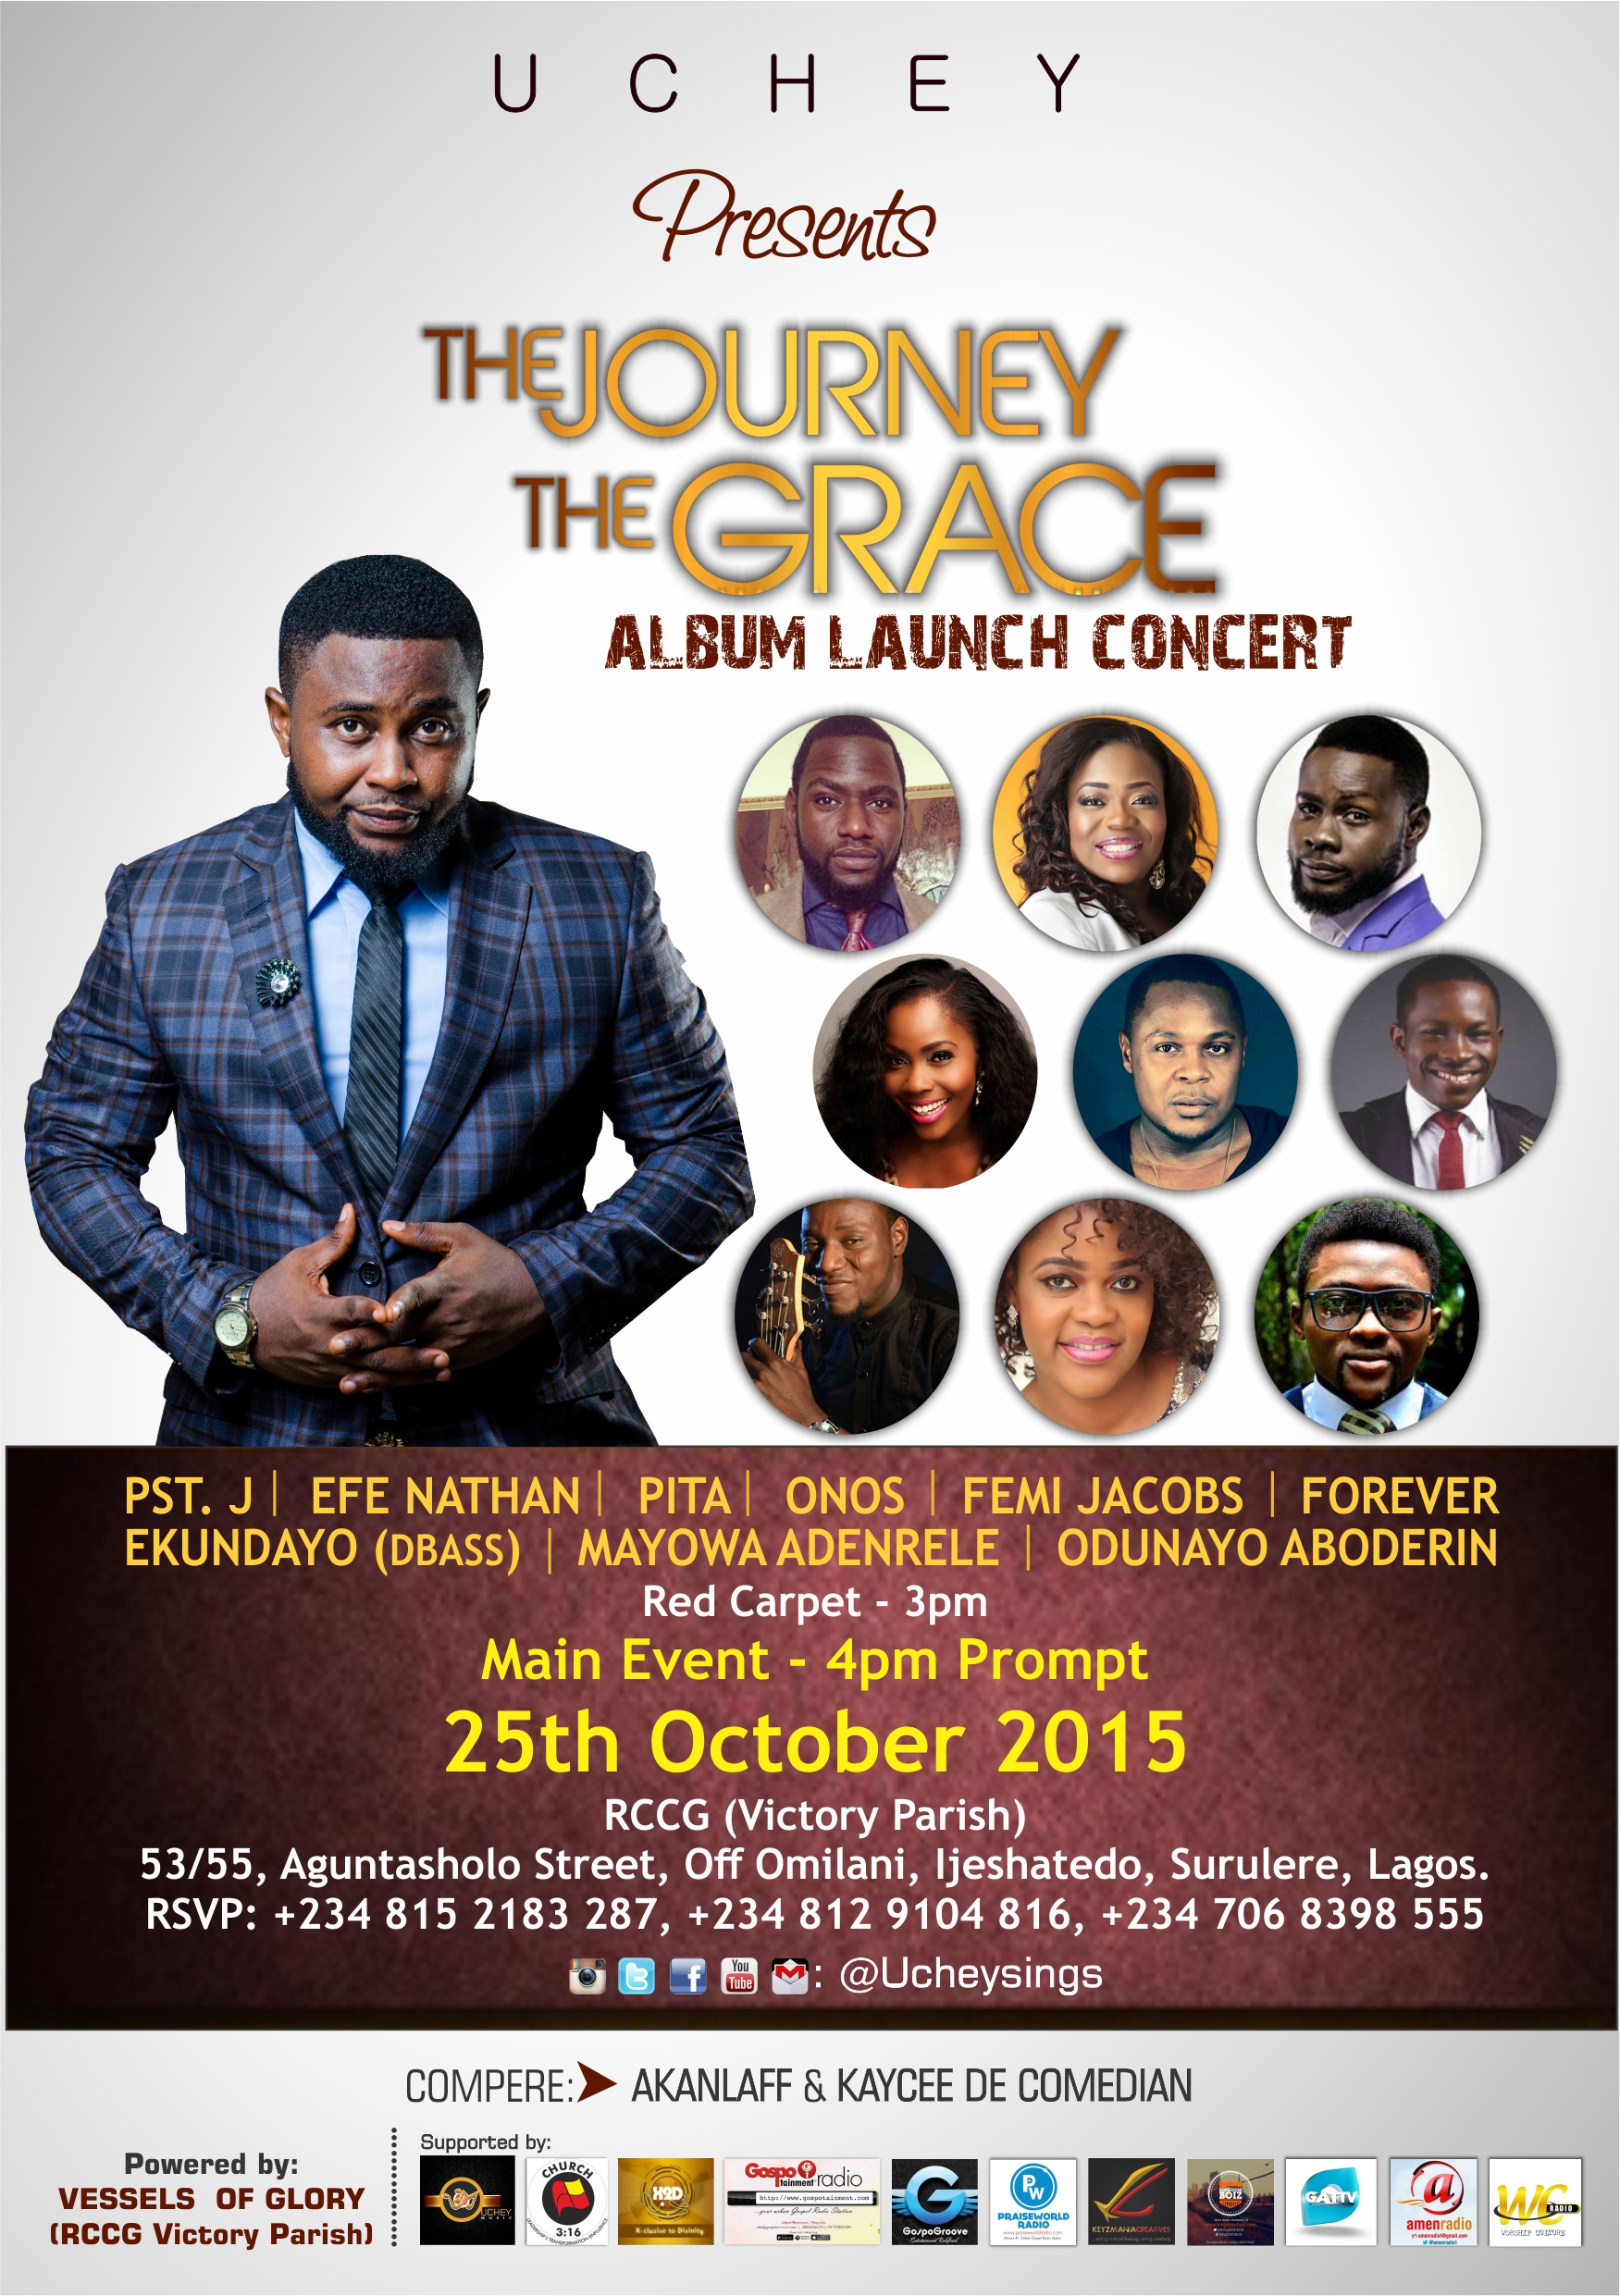 Event: Album Launch Concert Titled "The Journey The Grace" Uchey 1